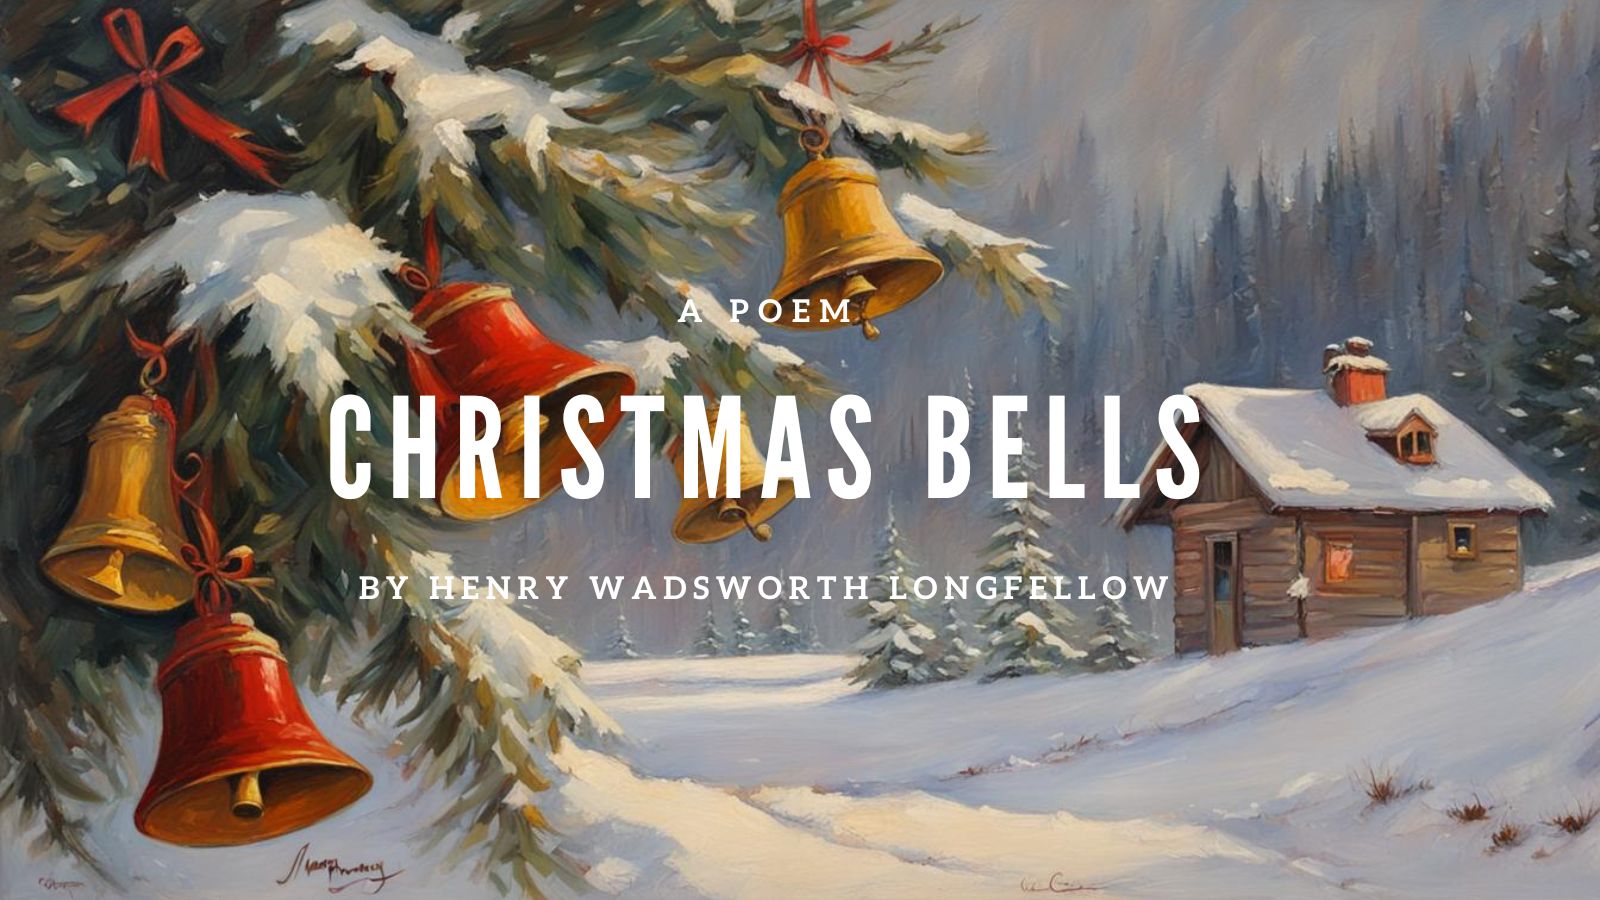 CHRISTMAS BELLS by Henry Wadsworth Longfellow